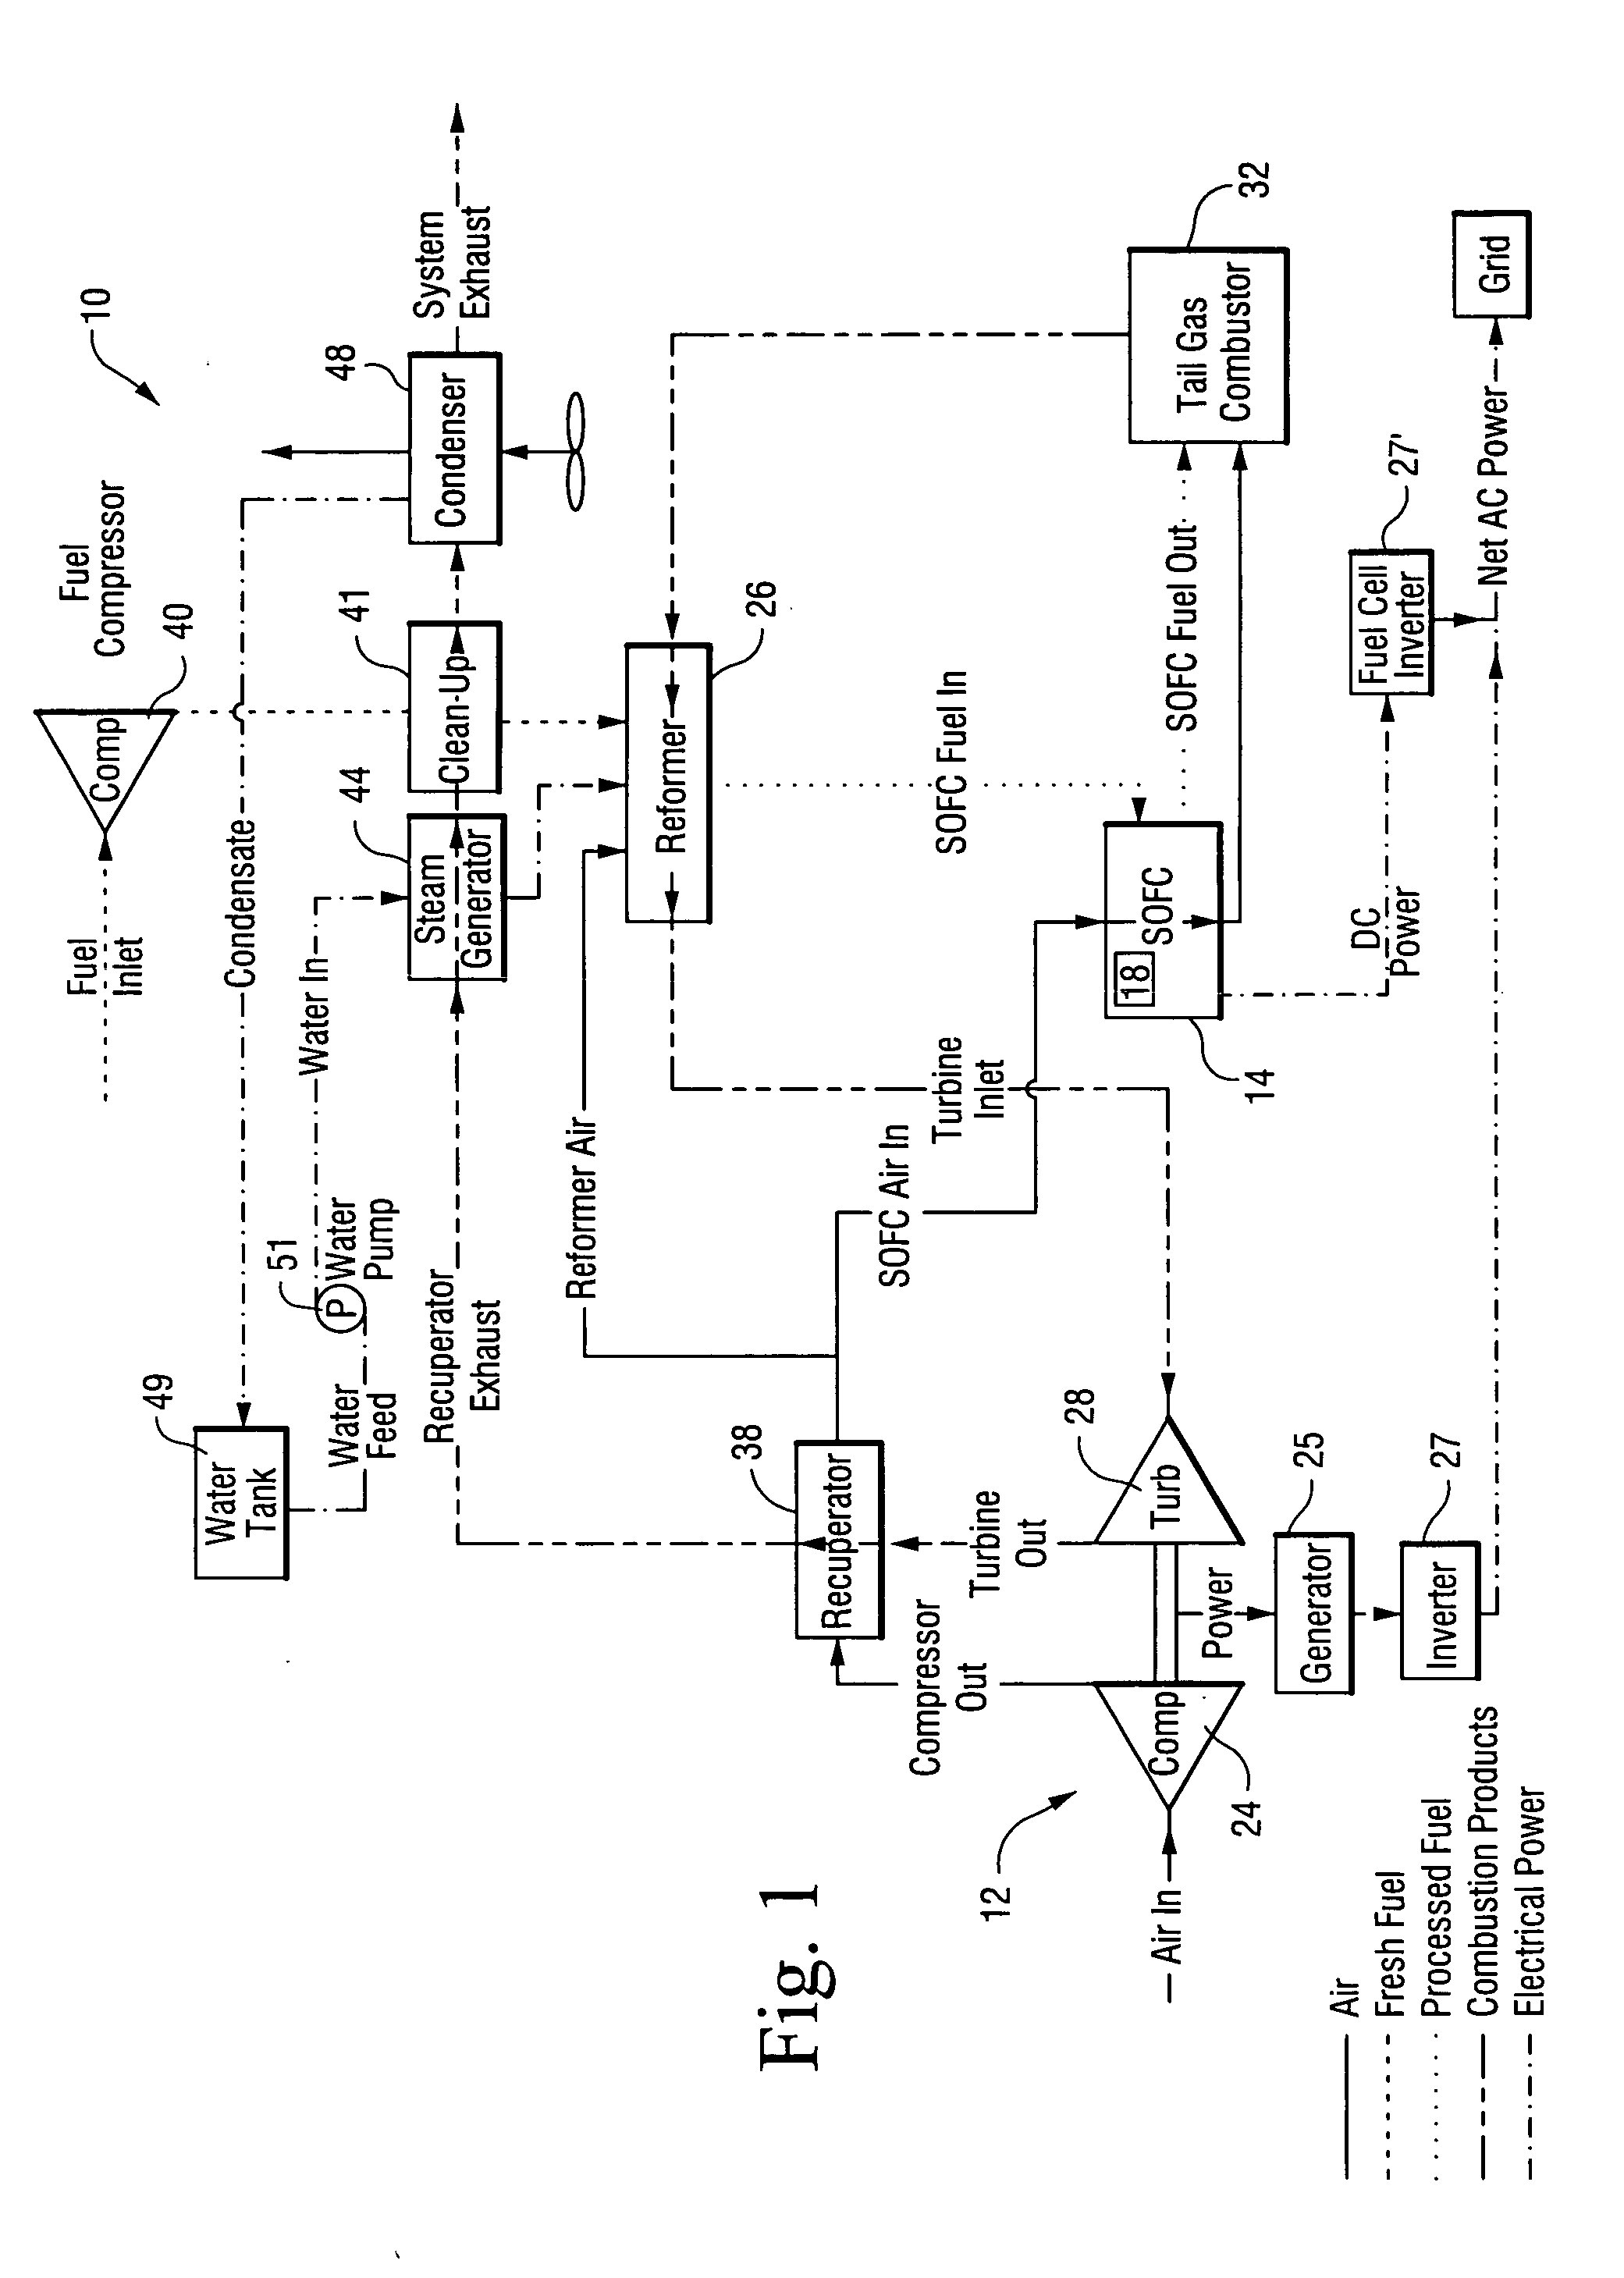 Pressurized near-isothermal fuel cell - gas turbine hybrid system